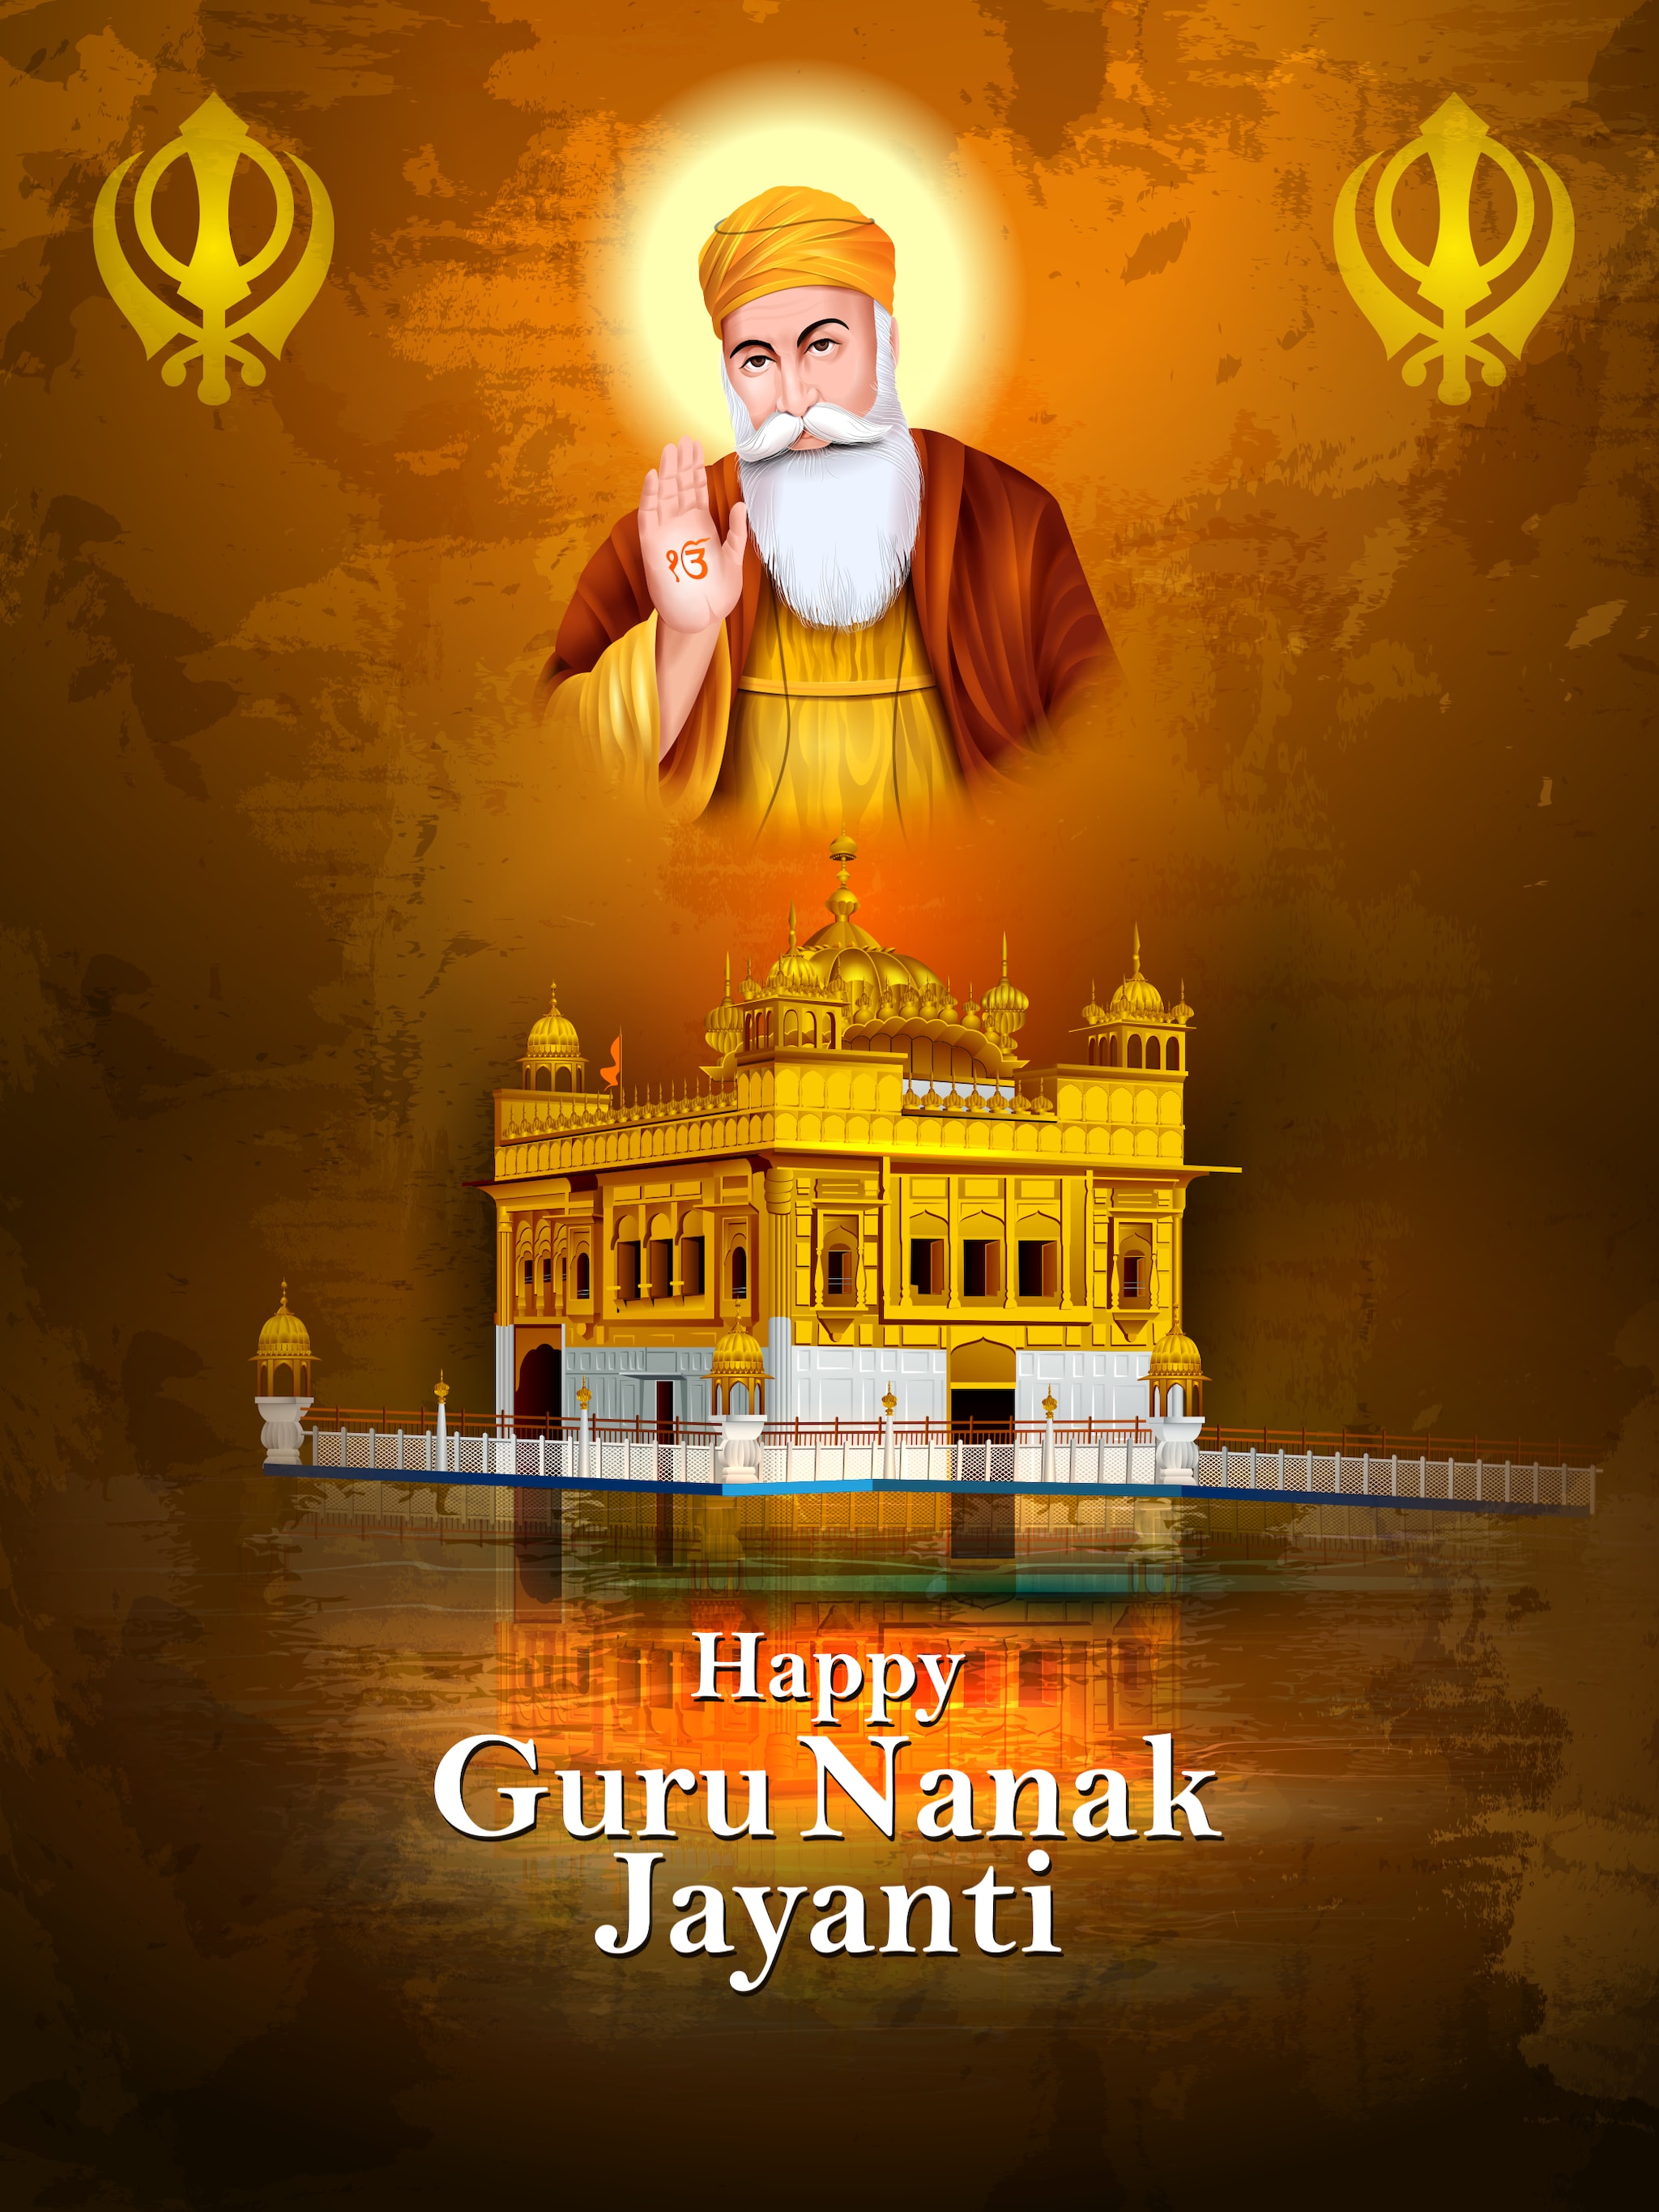 Happy Guru Nanak Jayanti 2021 Images, Wallpapers, Quotes, Status, Photos, Images, SMS, Wishes Messages.  (Image: Shutterstock)